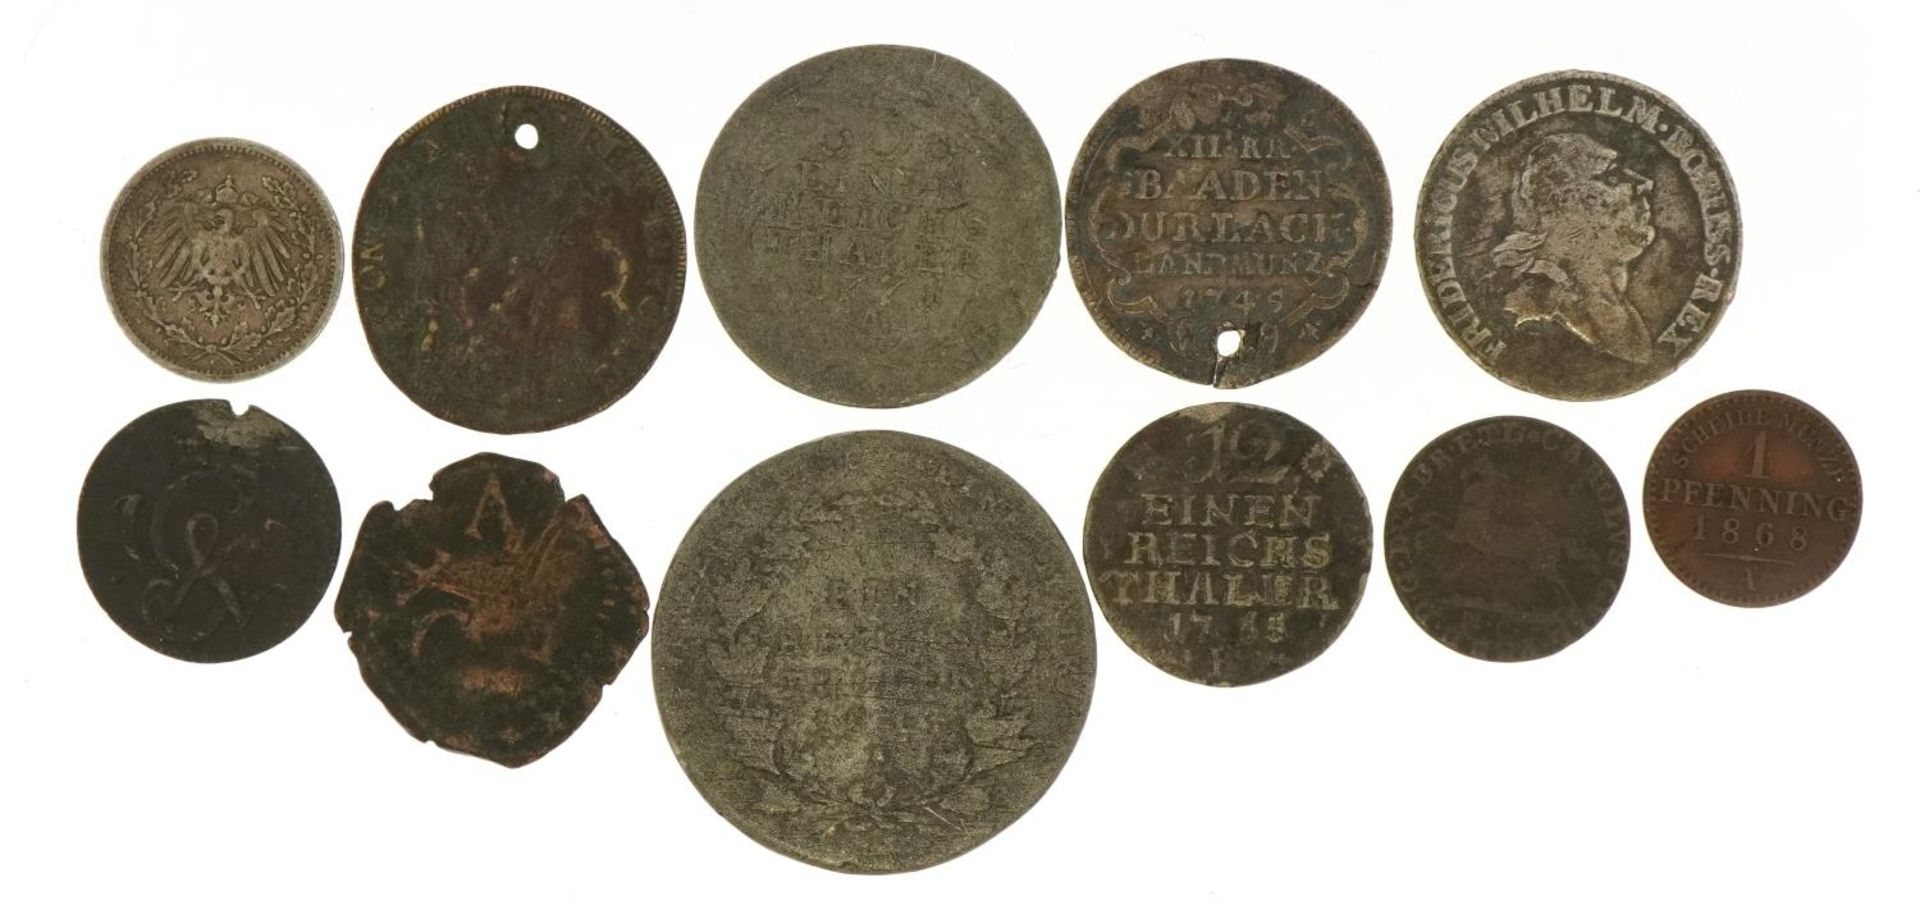 18th century and later German coinage including 1771 three thaler and 1756 quarter stuber - Image 2 of 2